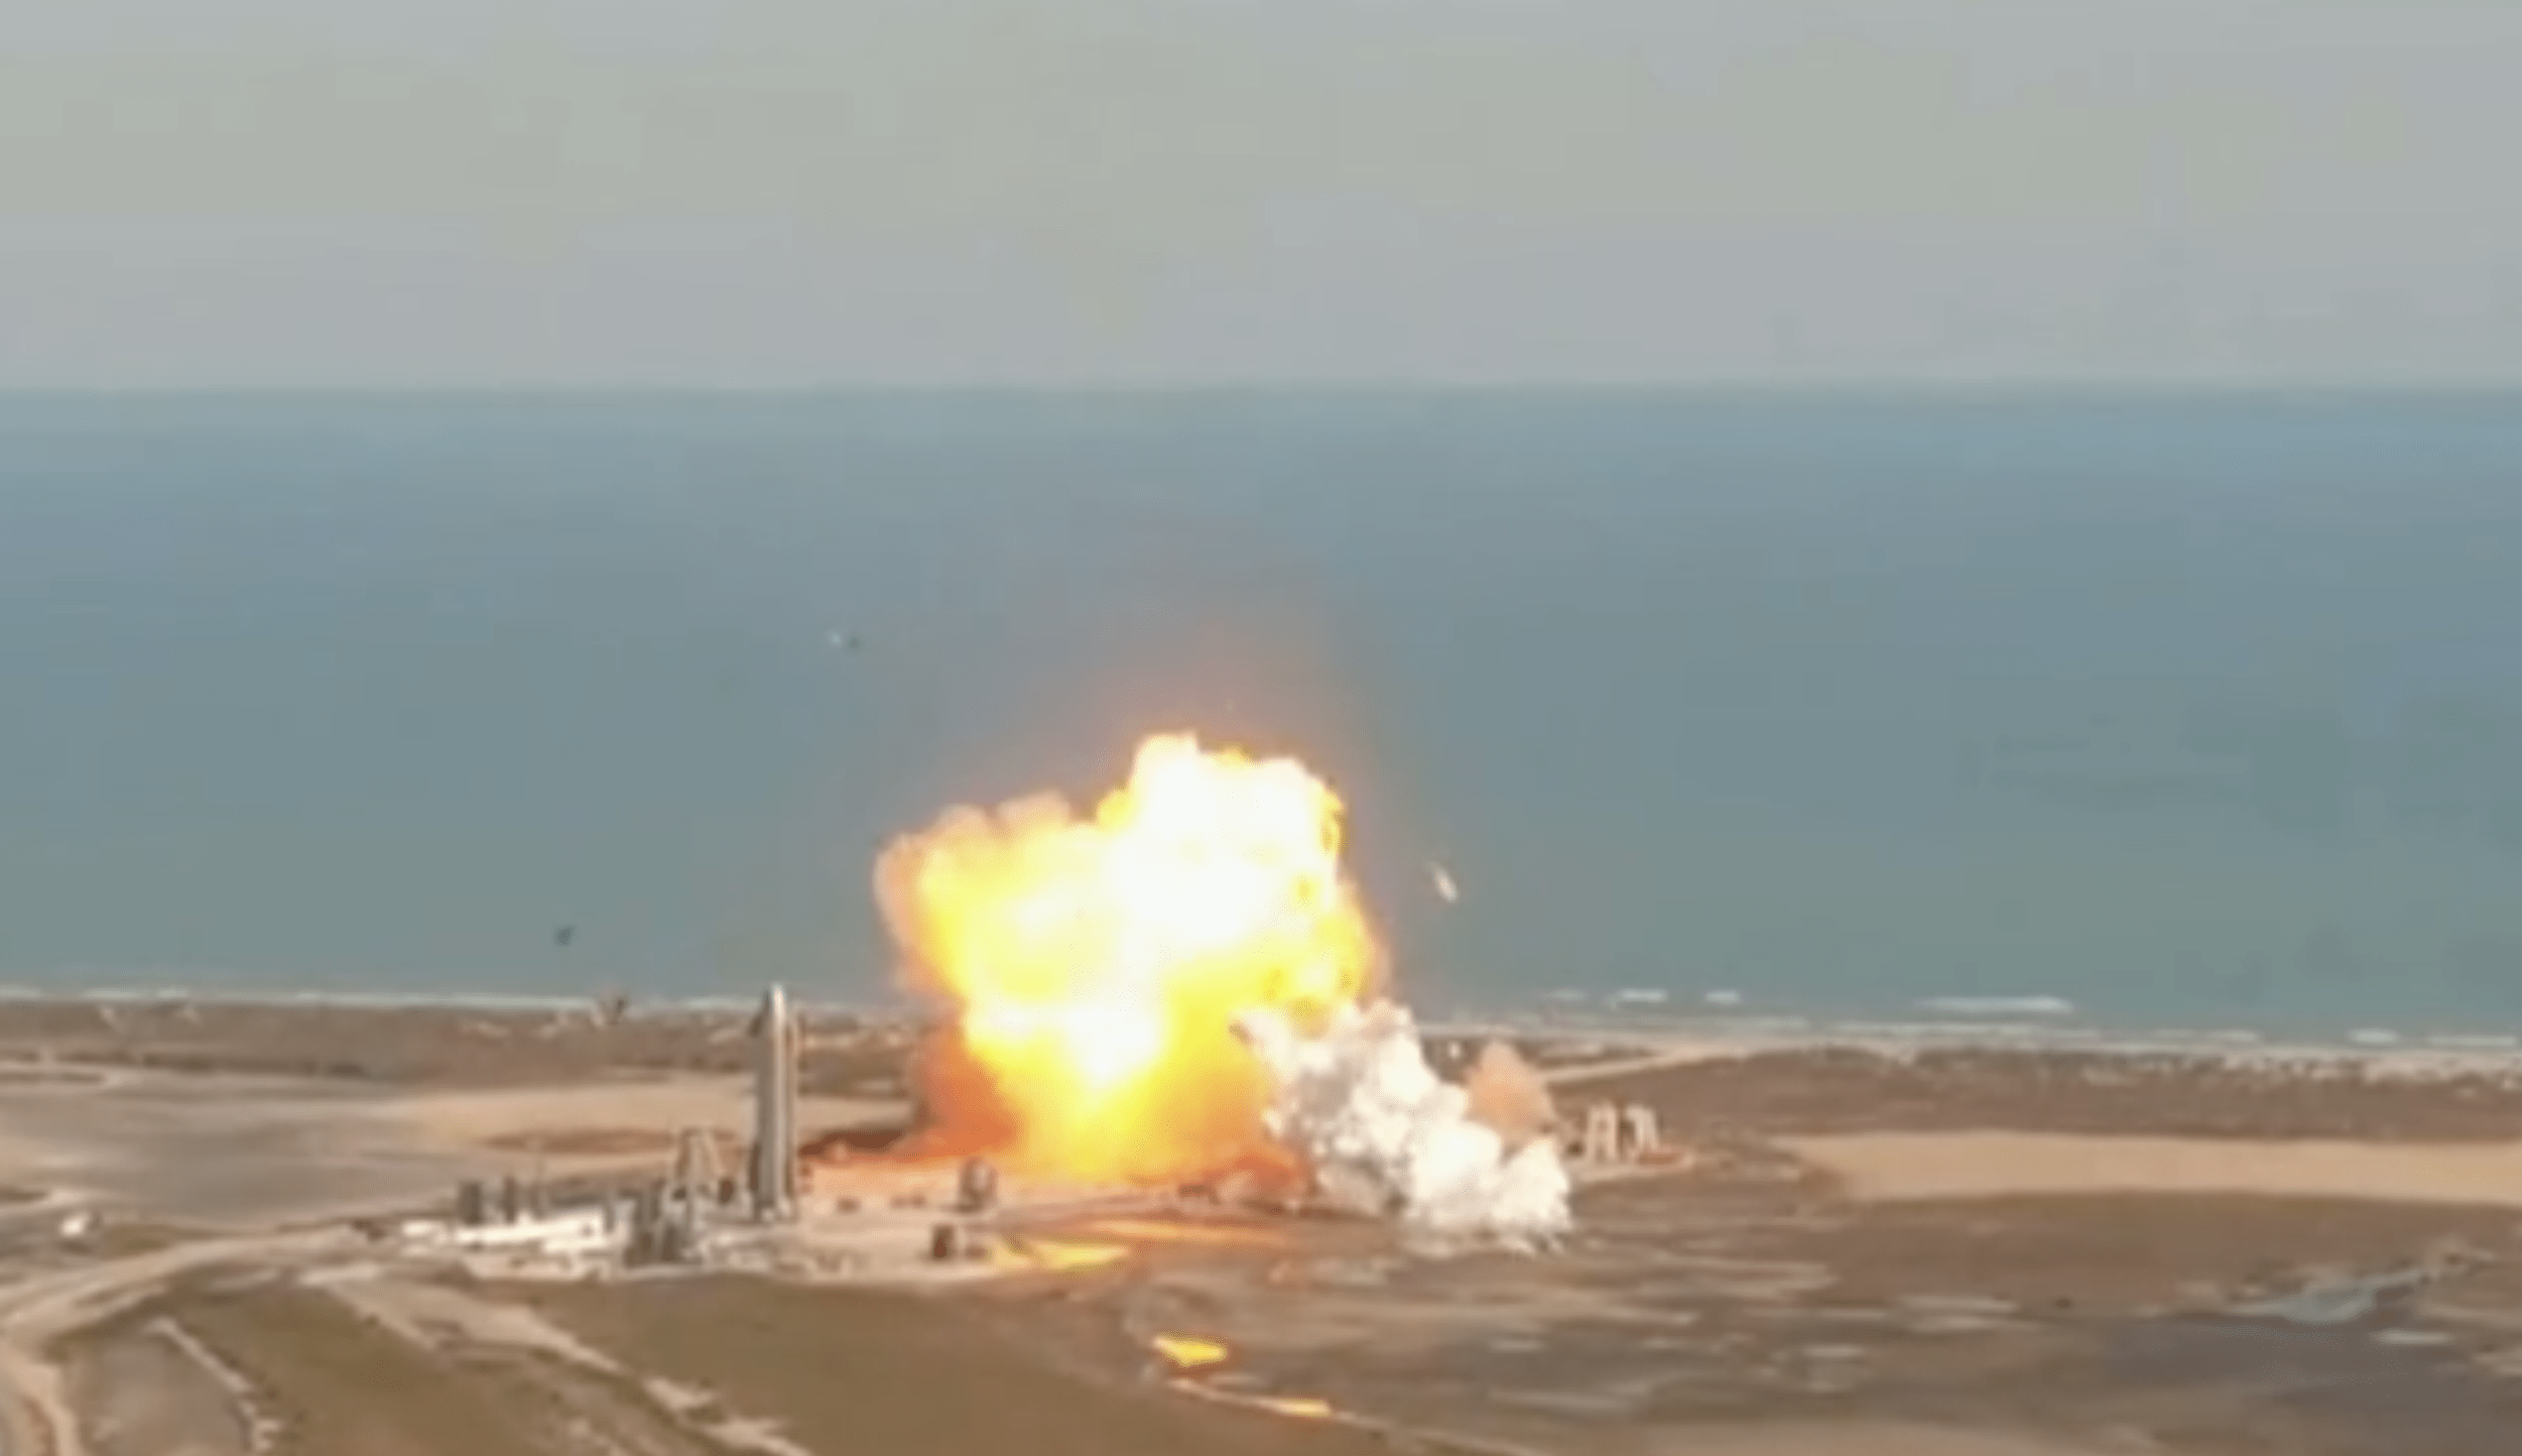 The SN9 Starship prototype exploding during a failed landing on February 2, 2021. (Image: SpaceX Webcast)